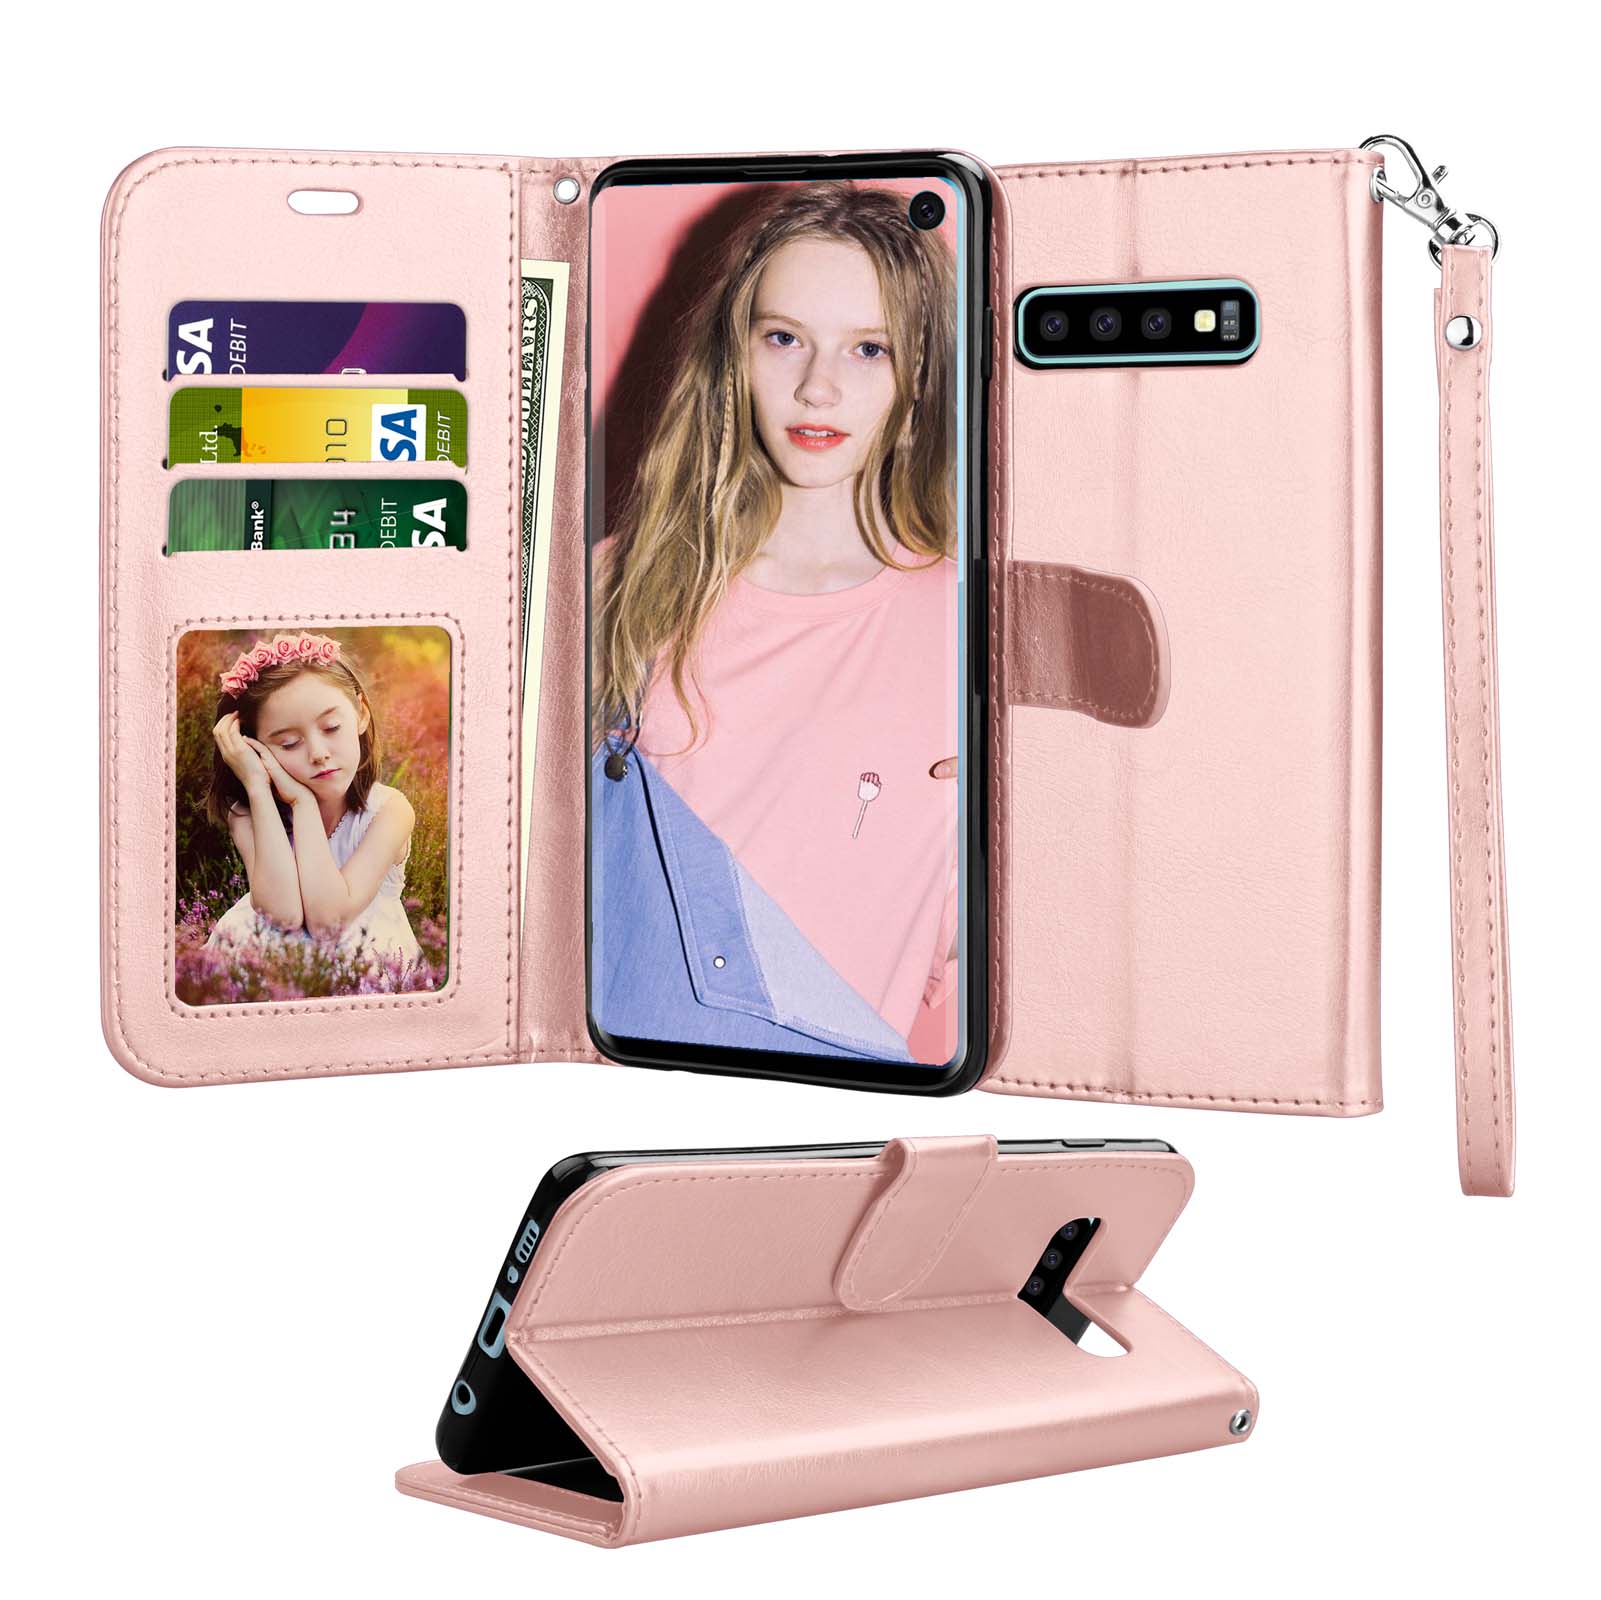 Tekcoo Galaxy S10 / S10 Plus / S10E Wallet Case, for Galaxy S10 / S10+ / S10e Case, Tekcoo [Rose Gold] PU Leather [3 Card Slots] ID Credit Flip Cover [Kickstand] Cover & Wrist Strap - image 1 of 5